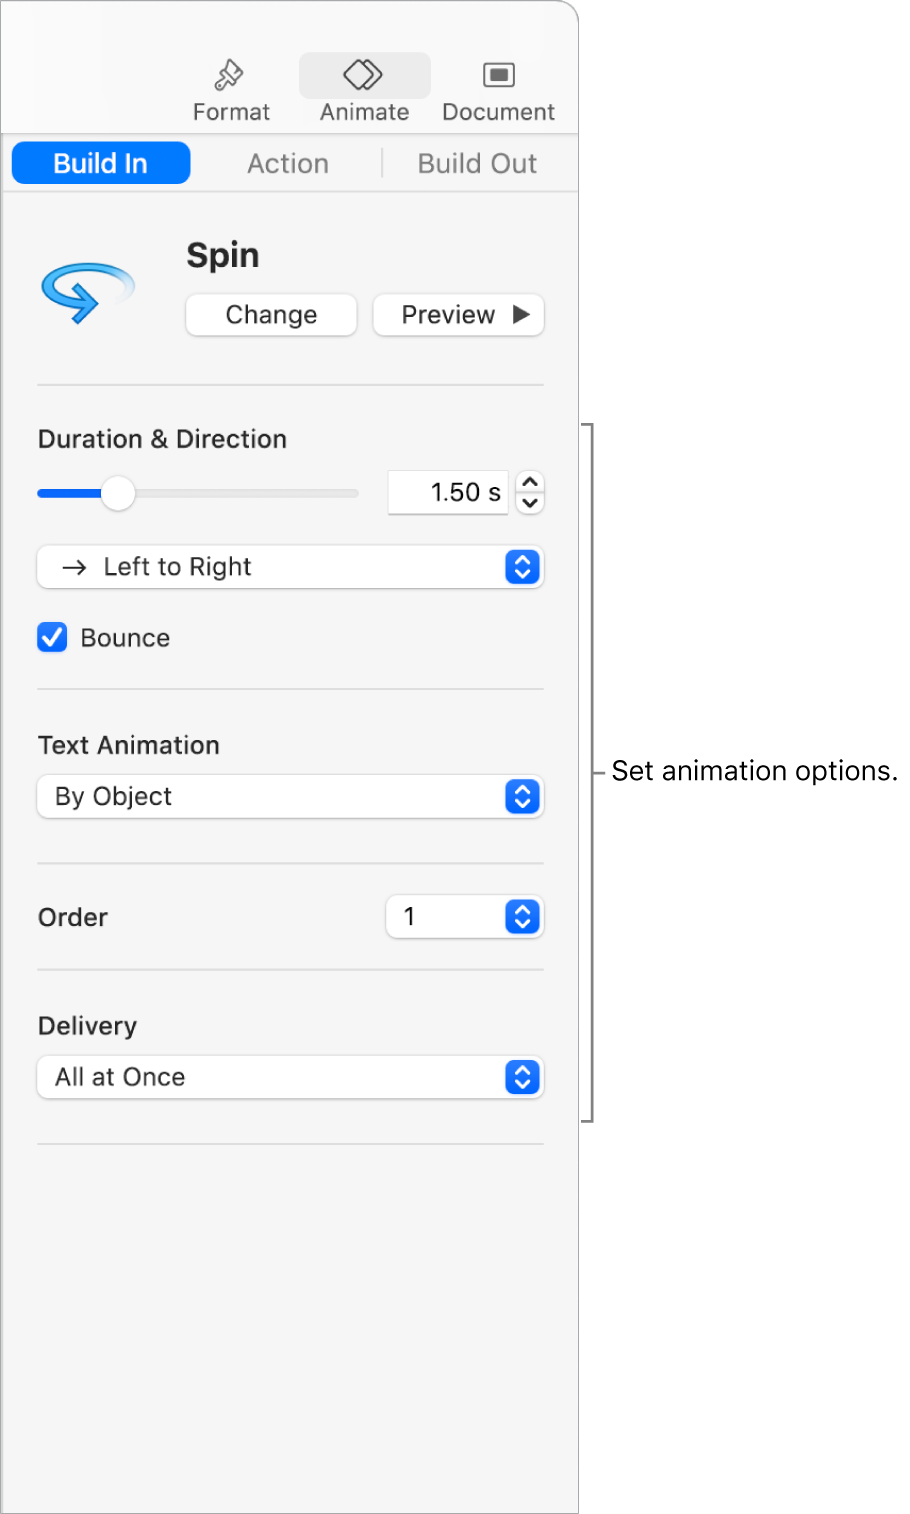 Build-in options in the Animate section of the sidebar.